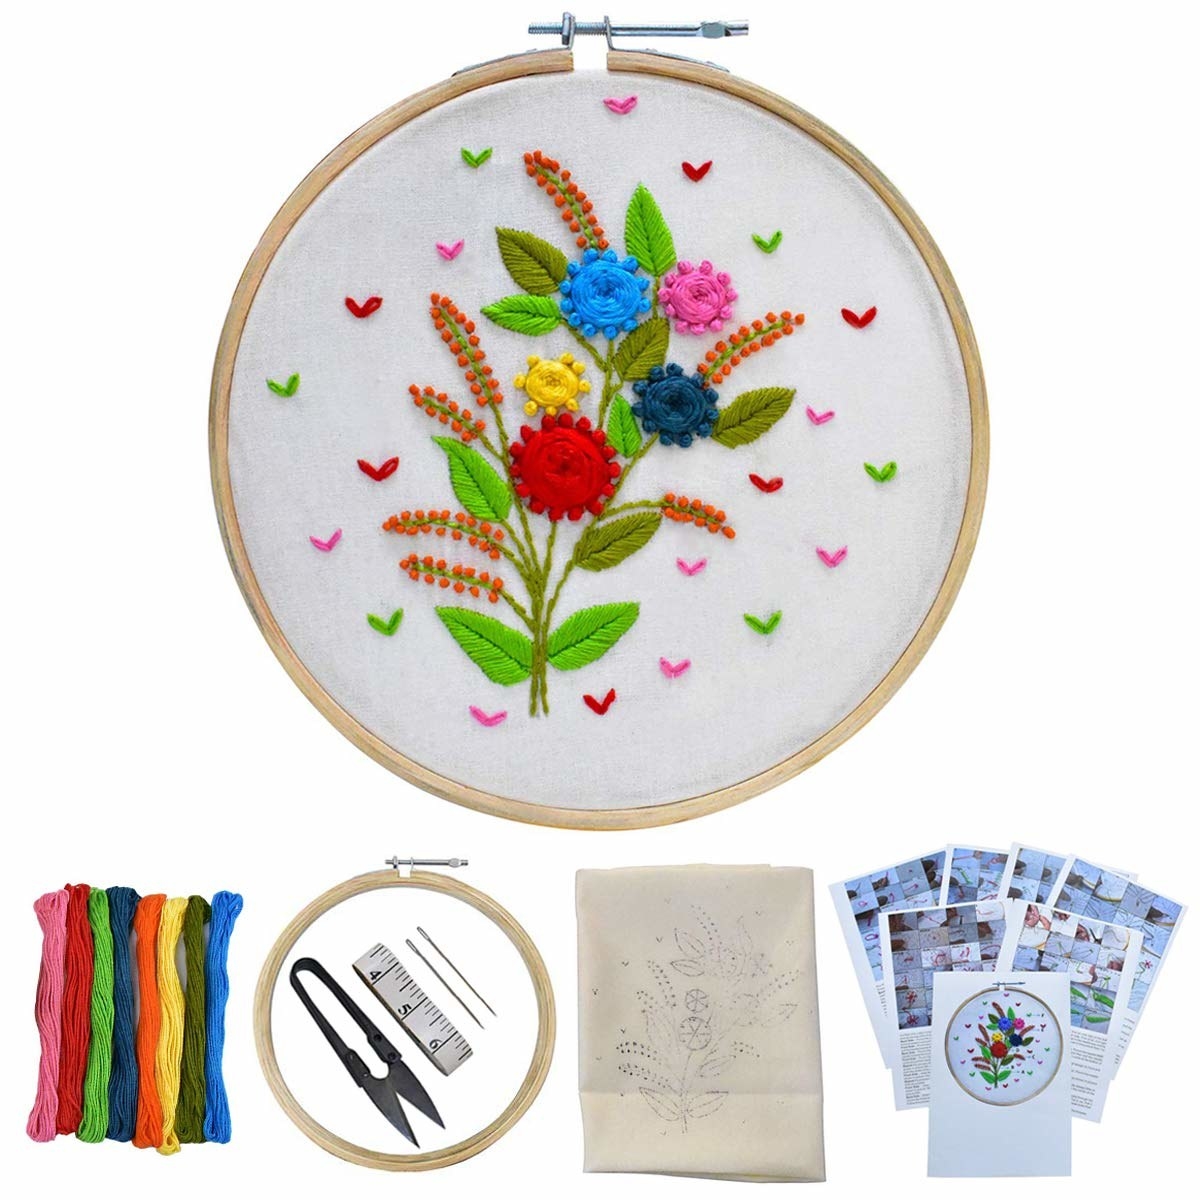 The embroidery set comes with threads, scissors, tape, needles, hoop and a pre-traced bouquet and instruction booklets.